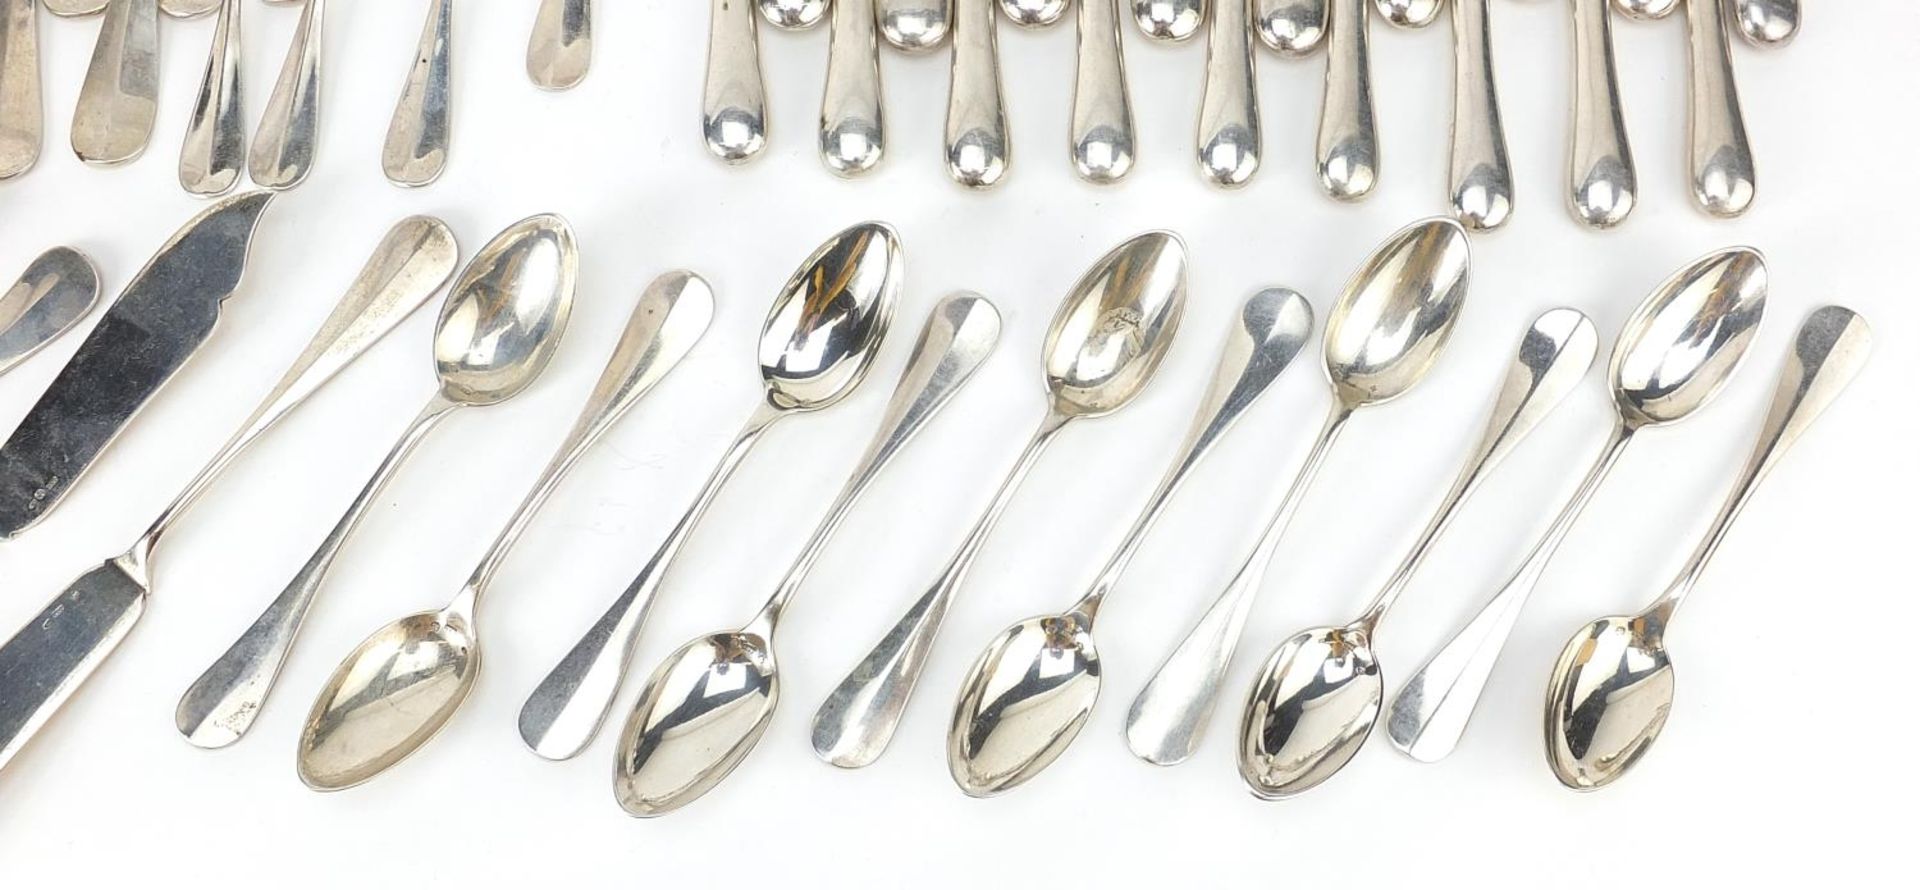 German silver cutlery including tablespoons, knives with steel blades, forks and teaspoons, the - Image 5 of 6